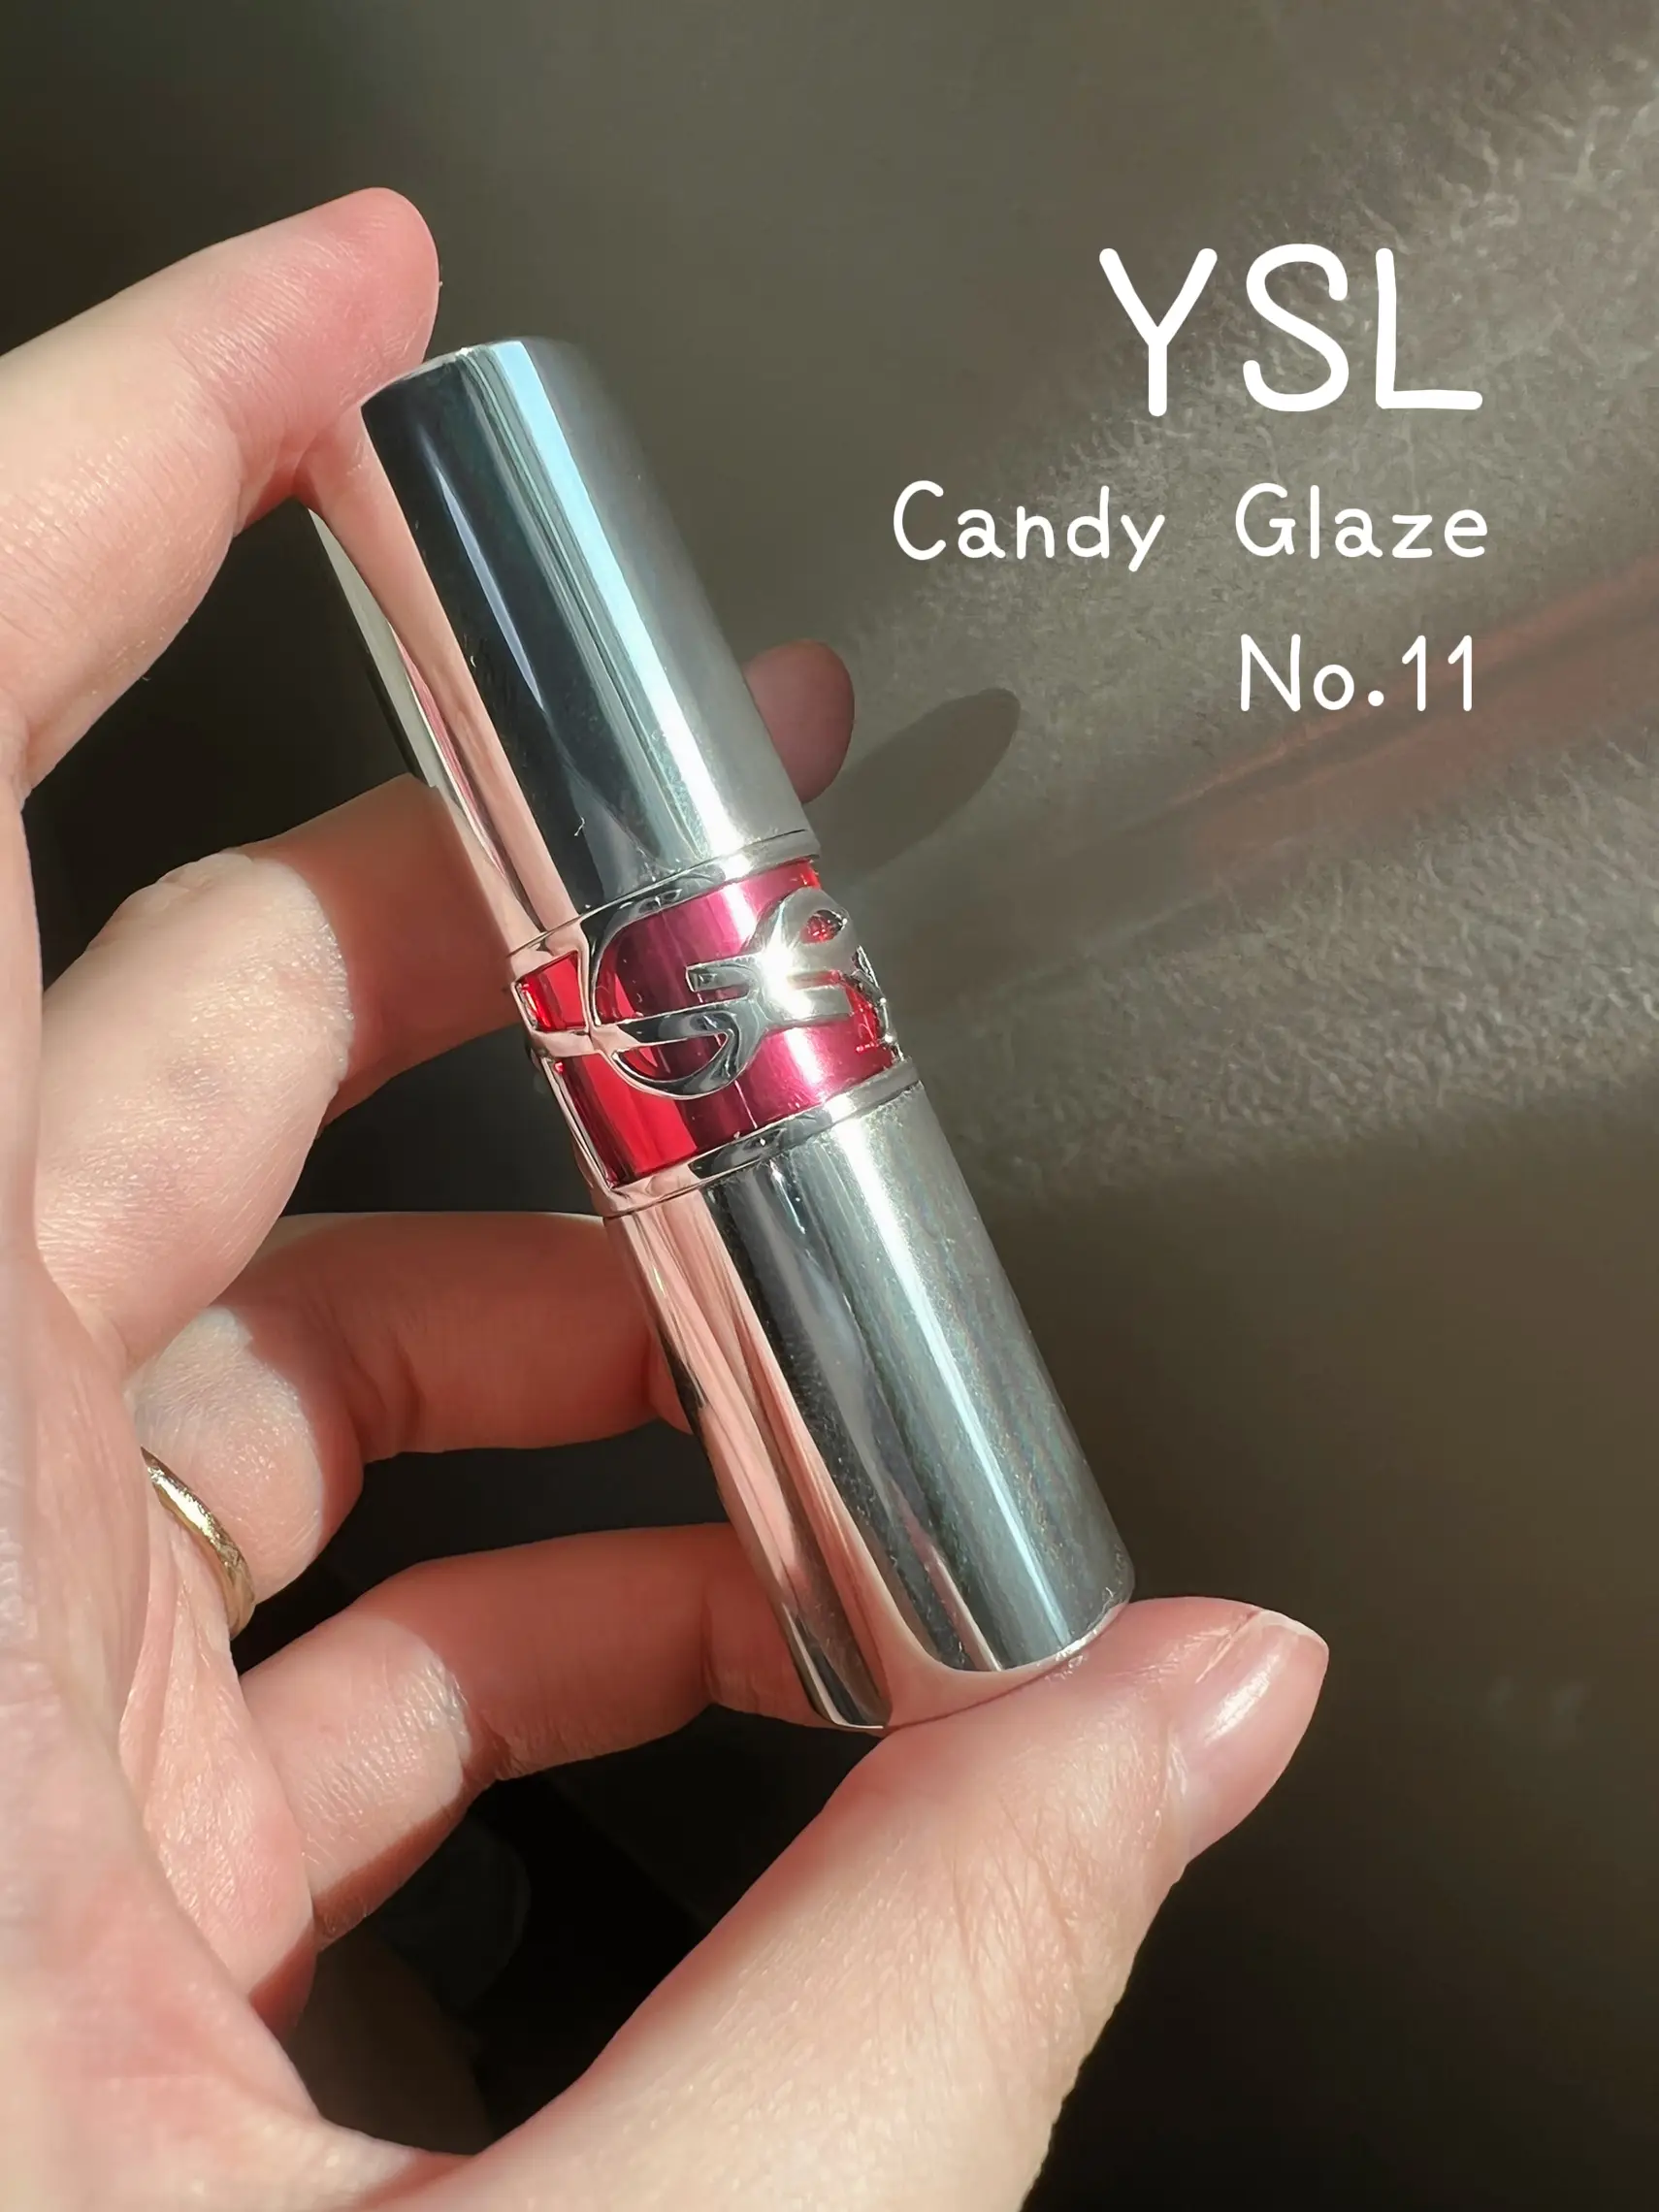 YSL Candy Glaze Lip Gloss Stick Swatches, Gallery posted by FreyaHu